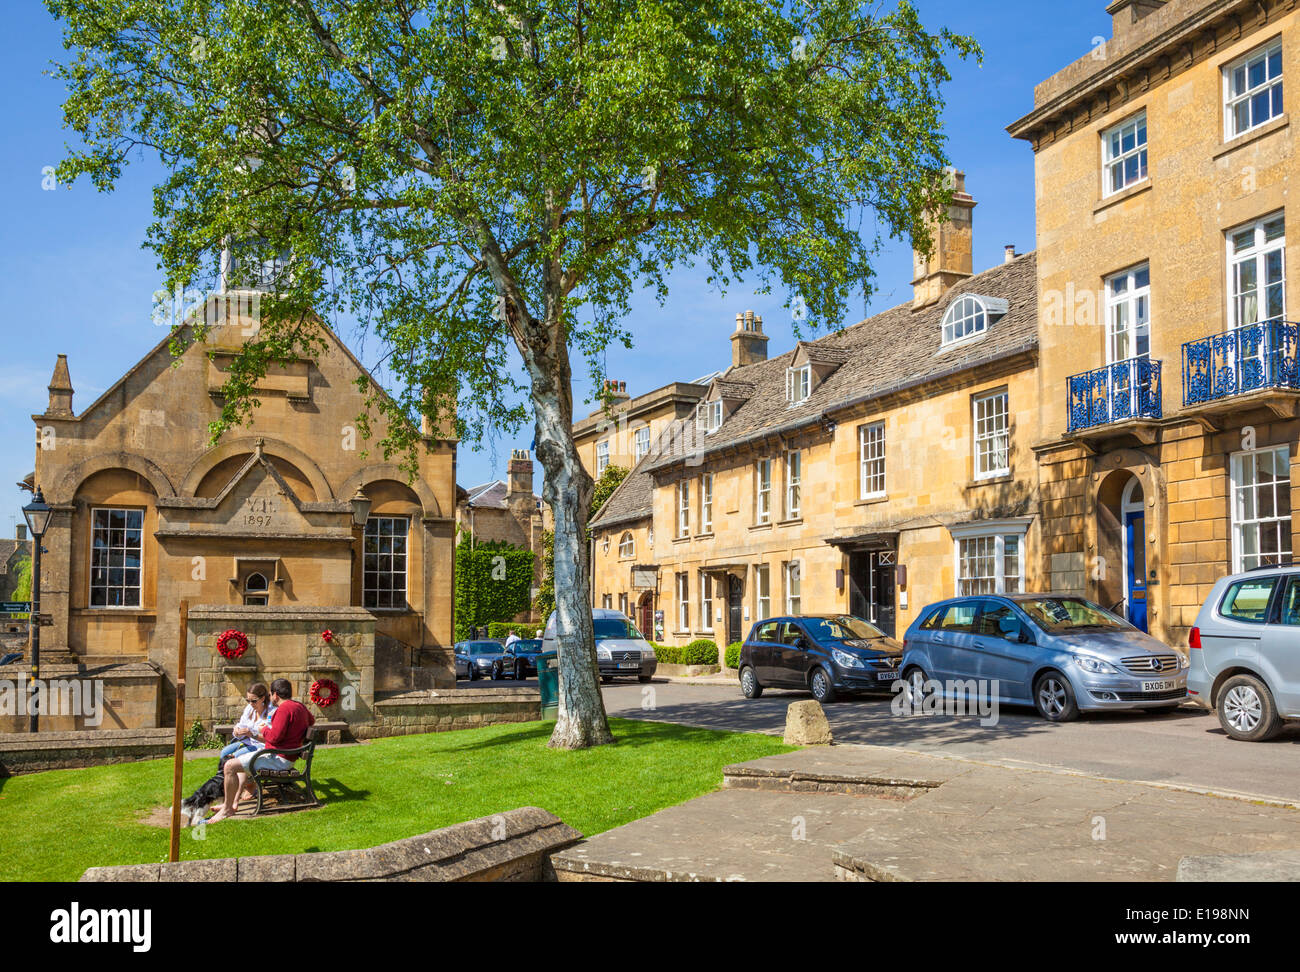 Chipping Campden High Street, Chipping Campden, The Cotswolds Gloucestershire England UK EU Europe Stock Photo